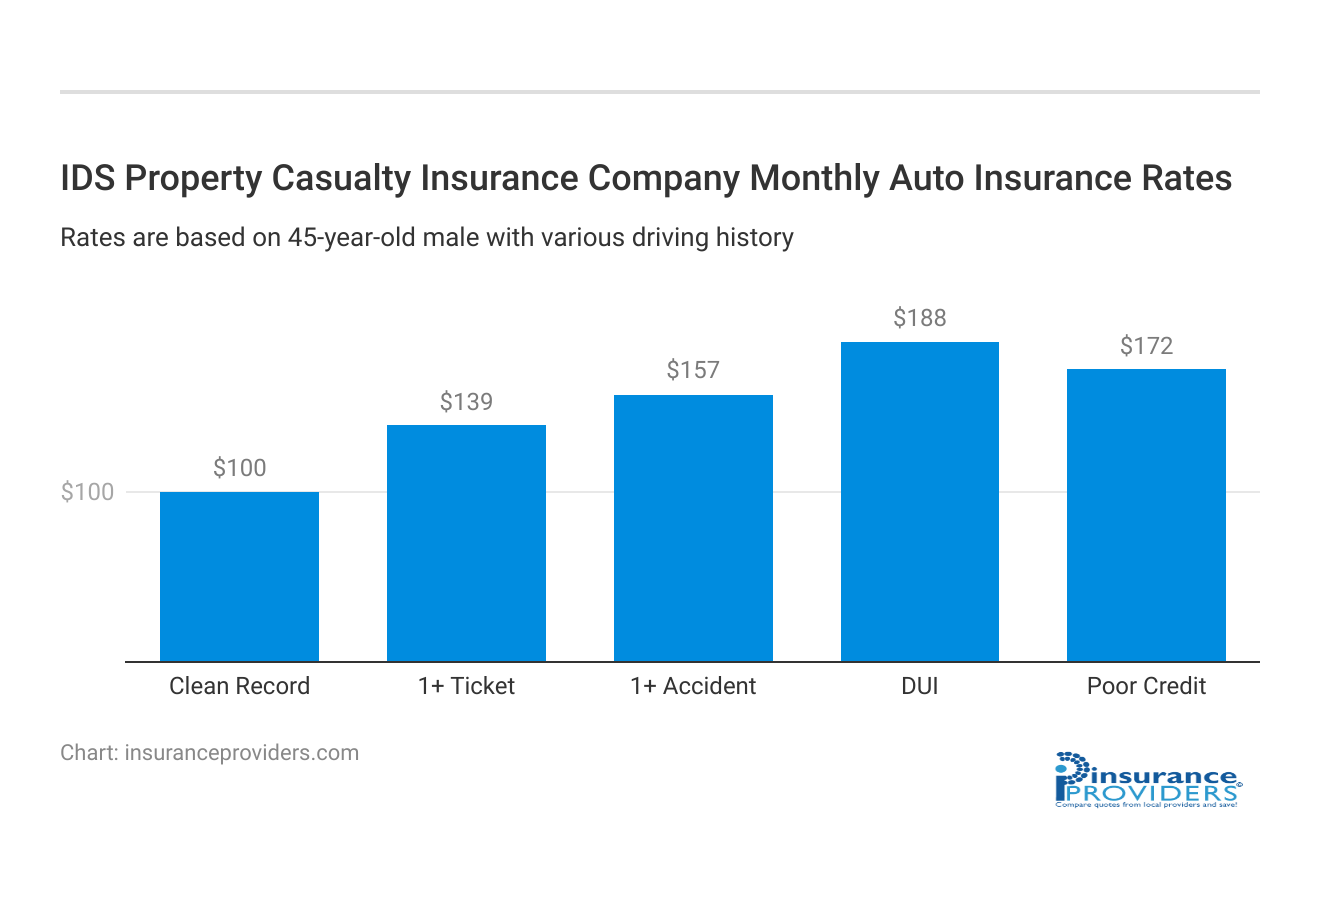 <h3>IDS Property Casualty Insurance Company Monthly Auto Insurance Rates</h3>